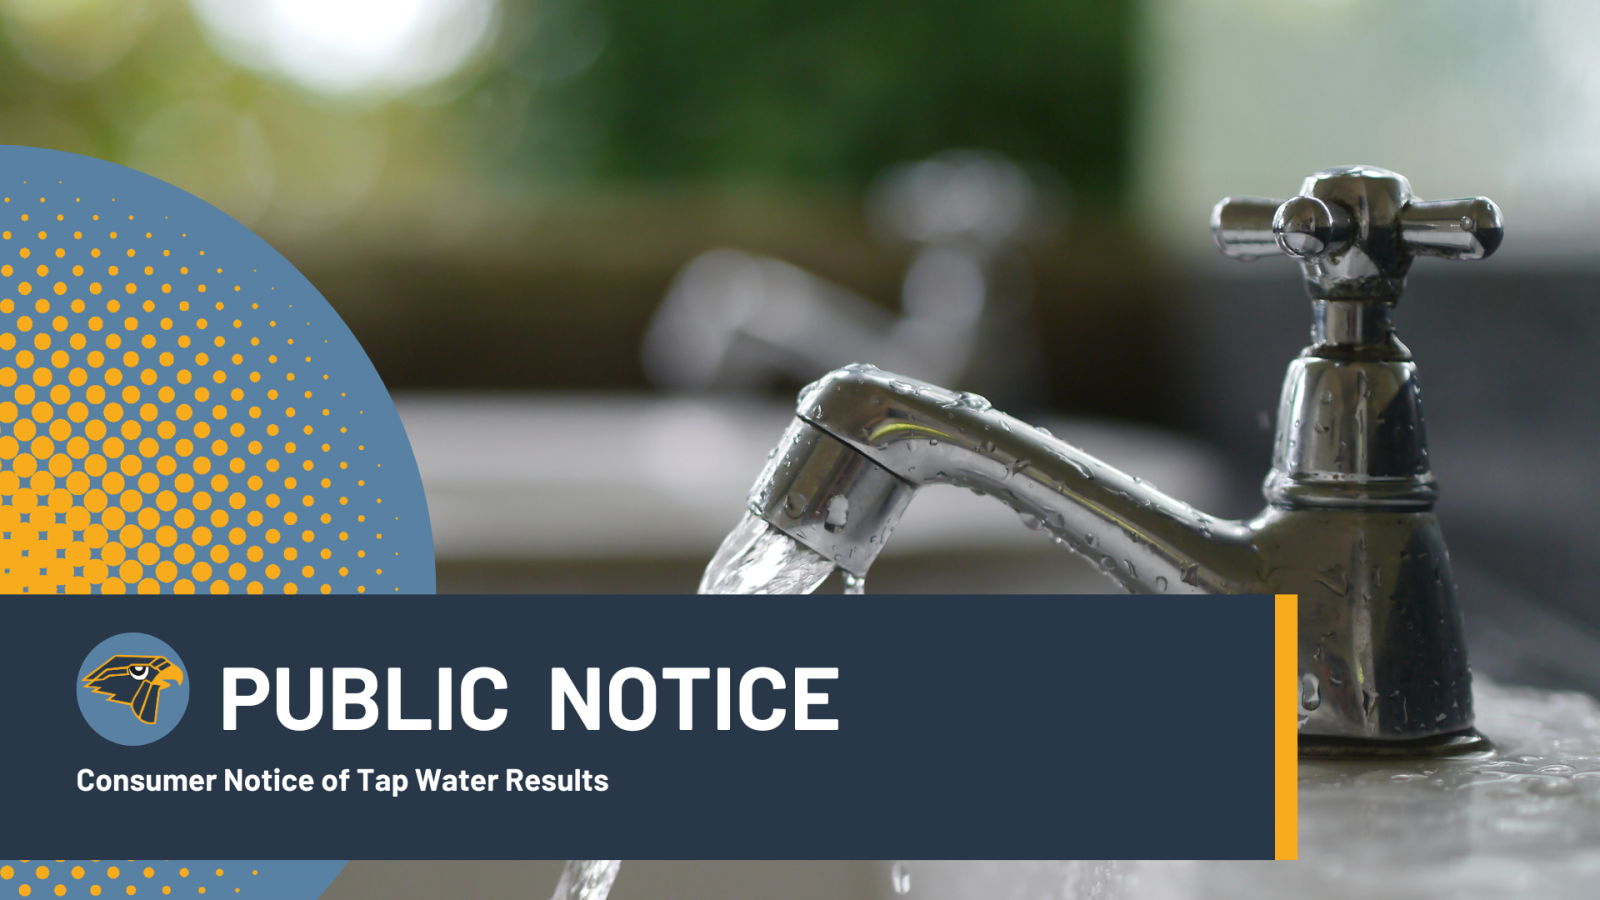 Public Notice: Consumer Notice of Tap Water Results